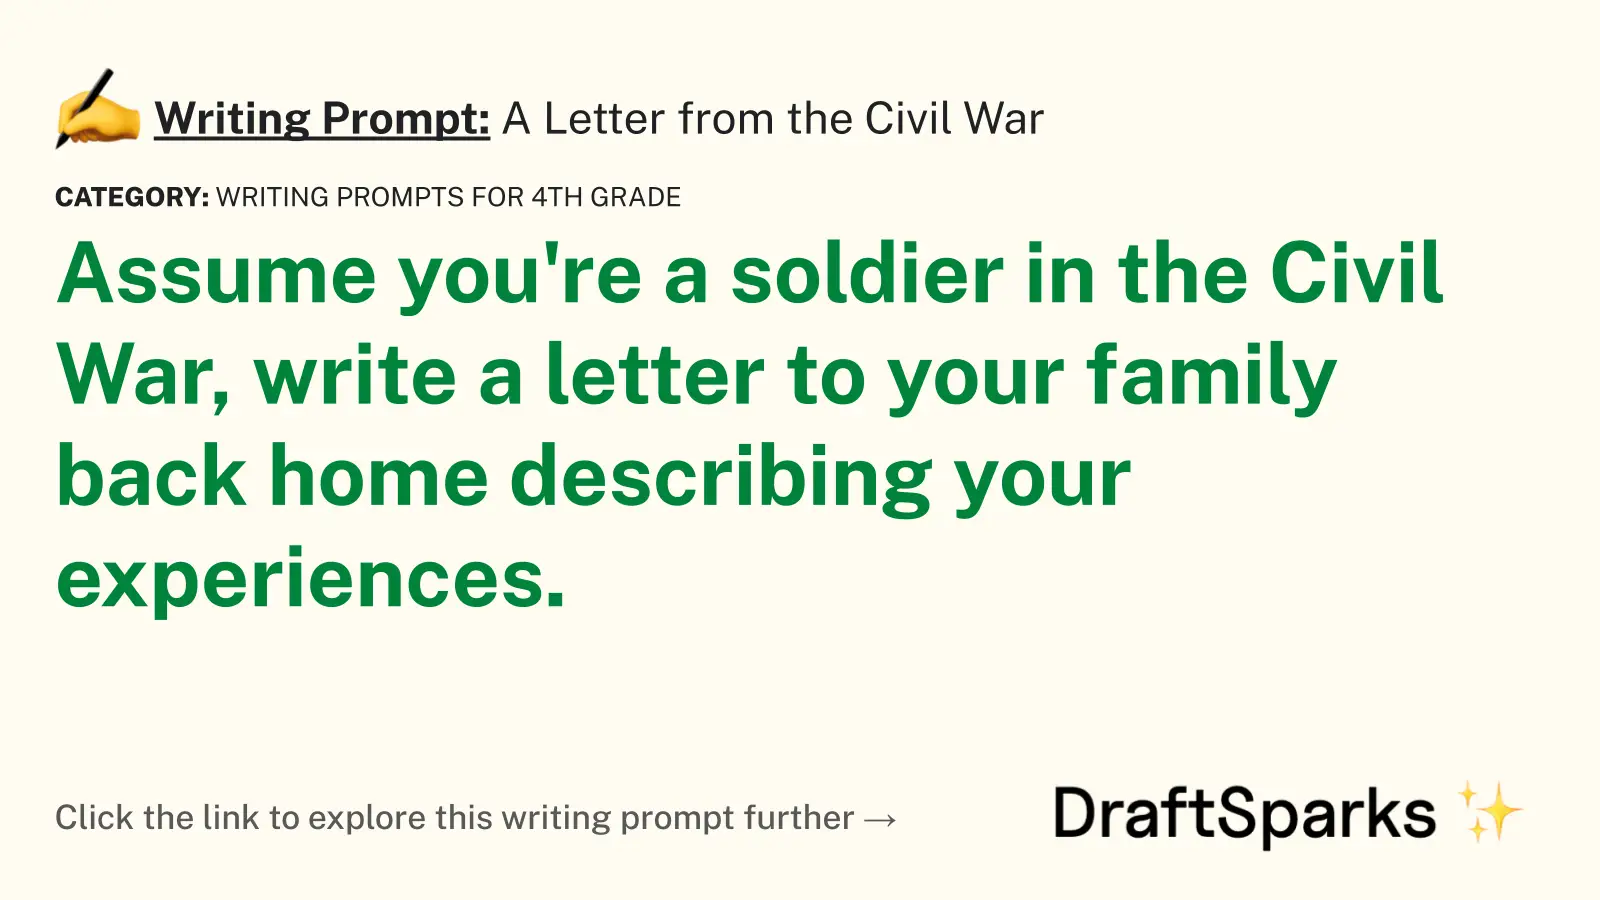 A Letter from the Civil War